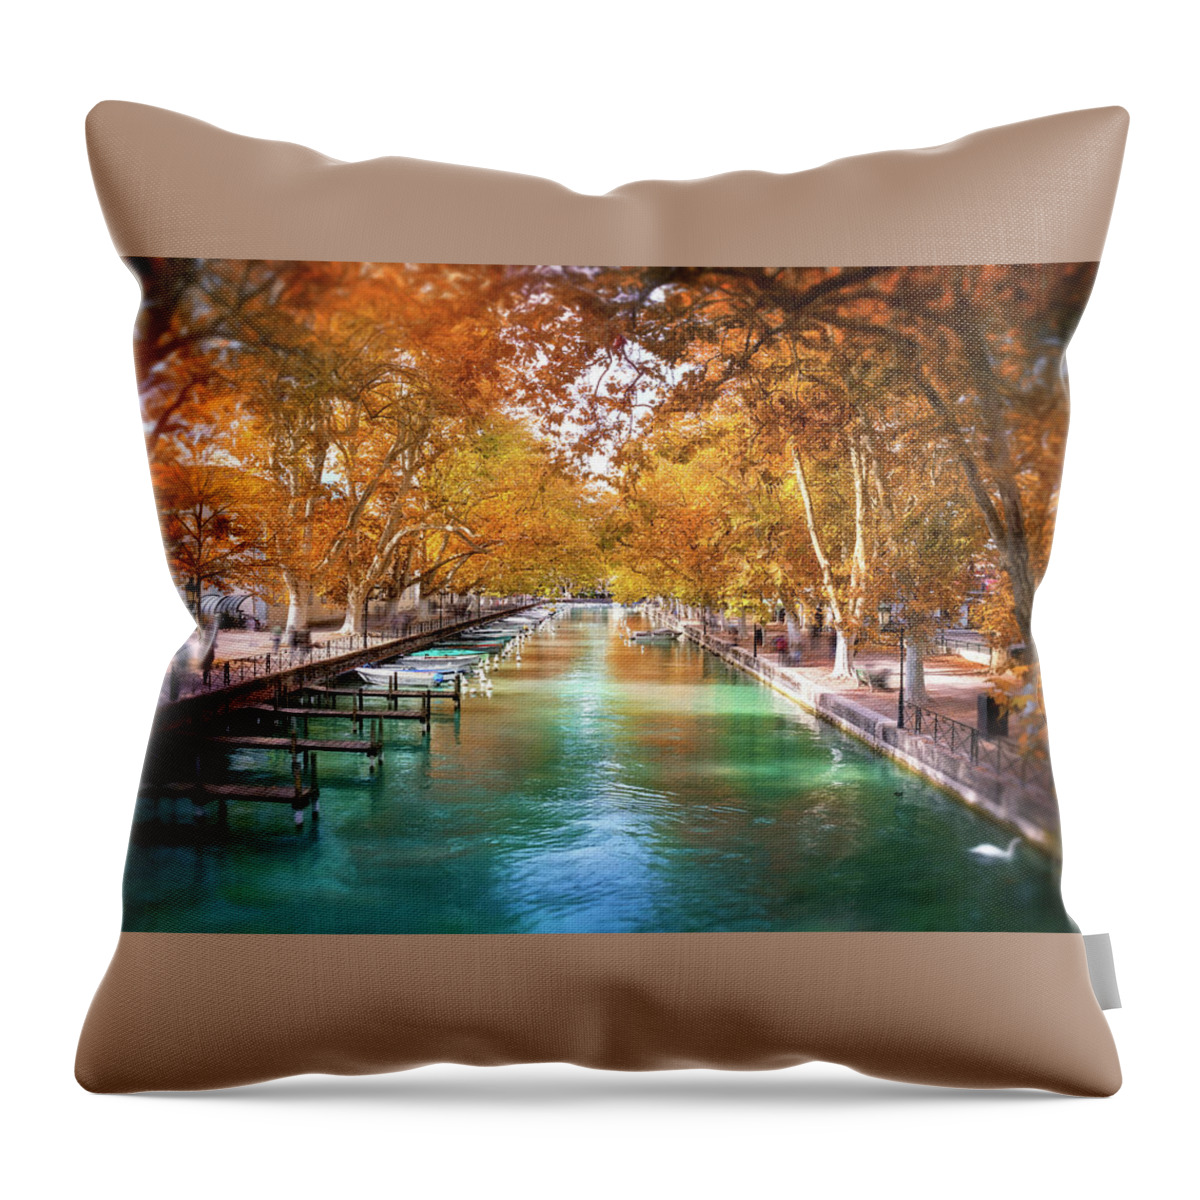 Annecy Throw Pillow featuring the photograph Annecy France Idyllic Canal du Vasse by Carol Japp